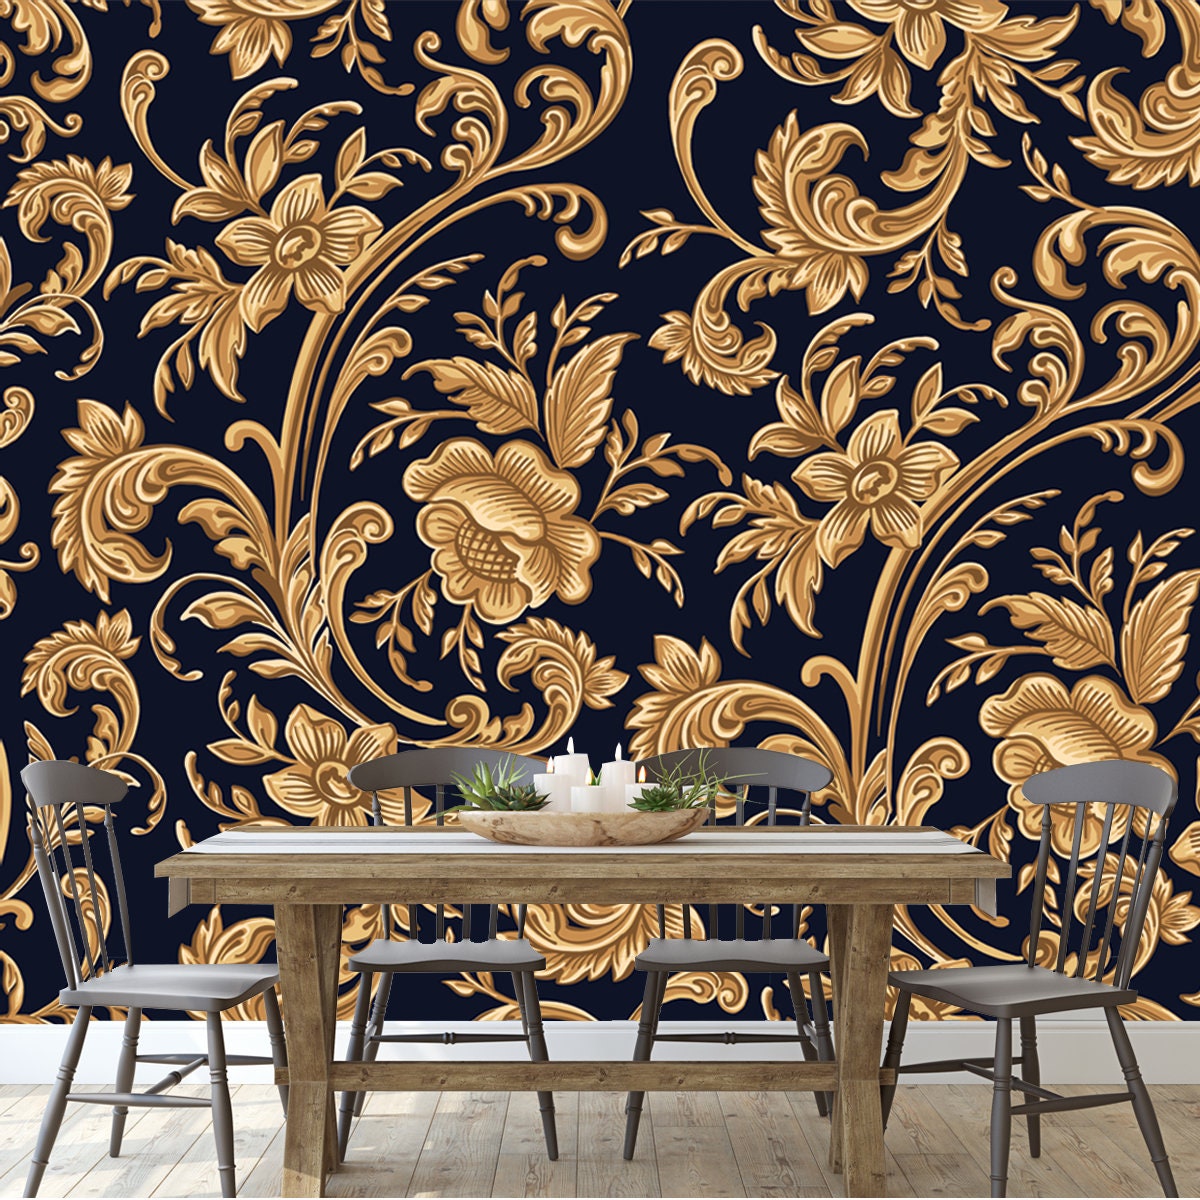 Seamless Pattern of Decorative Gold Floral Element Wallpaper Dining Room Mural